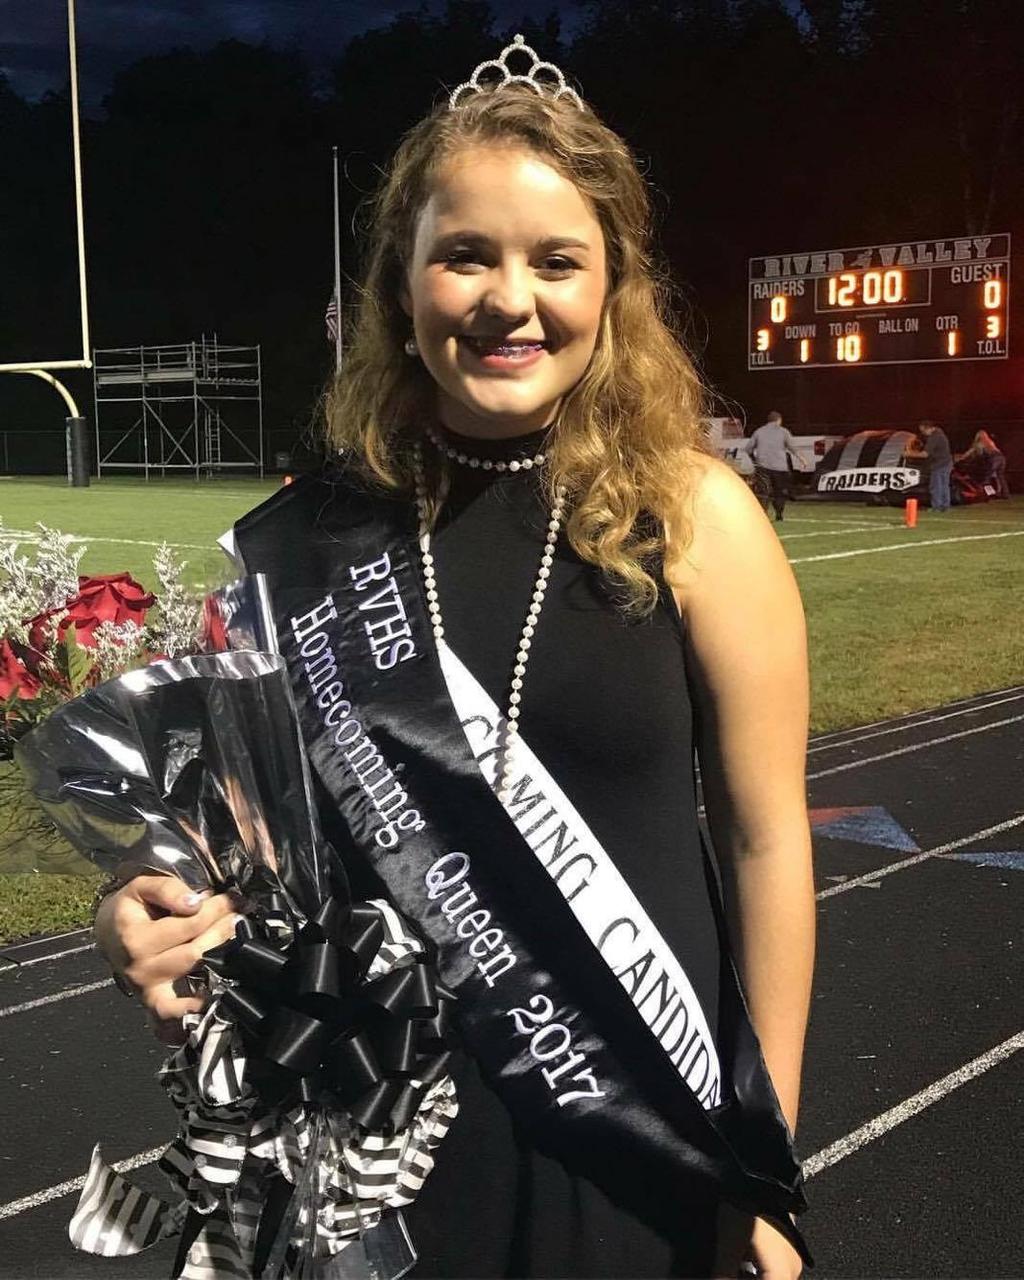 2017 Raider Homecoming Queen 2017 Homecoming Queen Isabella Mershon Isabella is the daughter of Brian